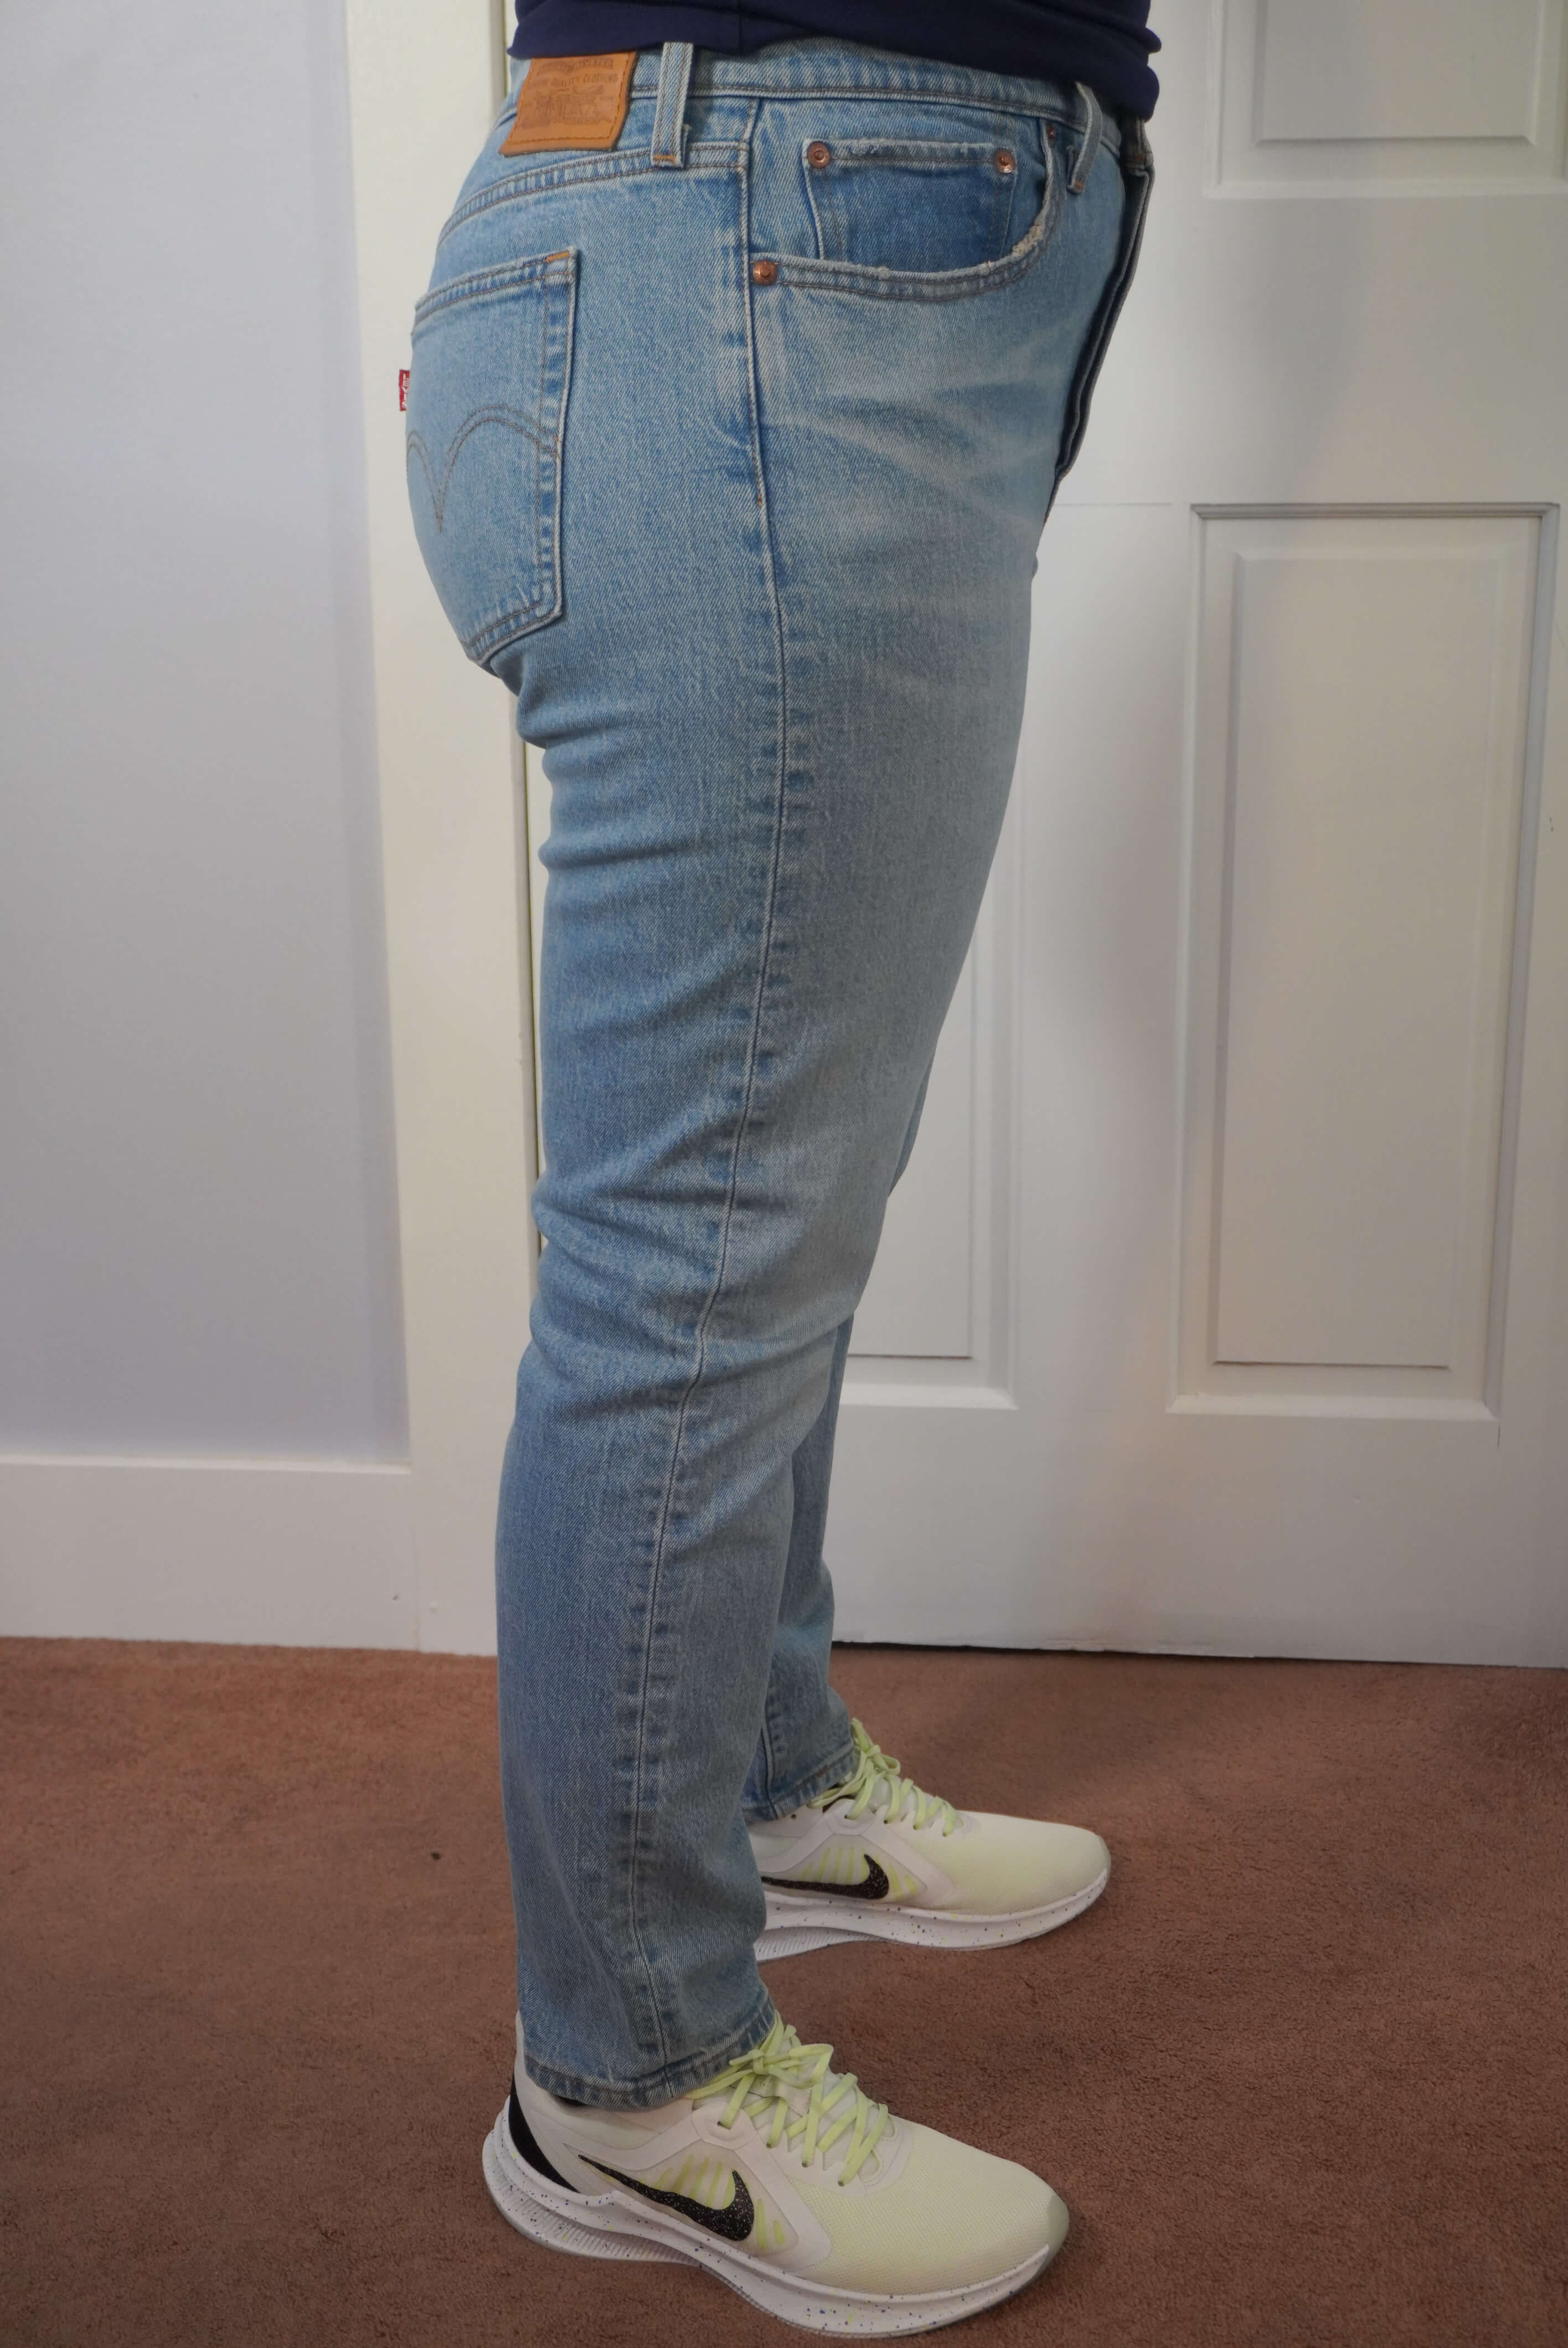 This image shows a side view of the author wearing a pair of Levi's Wedgie jeans in a light blue wash. This shows how the jeans are straight leg.